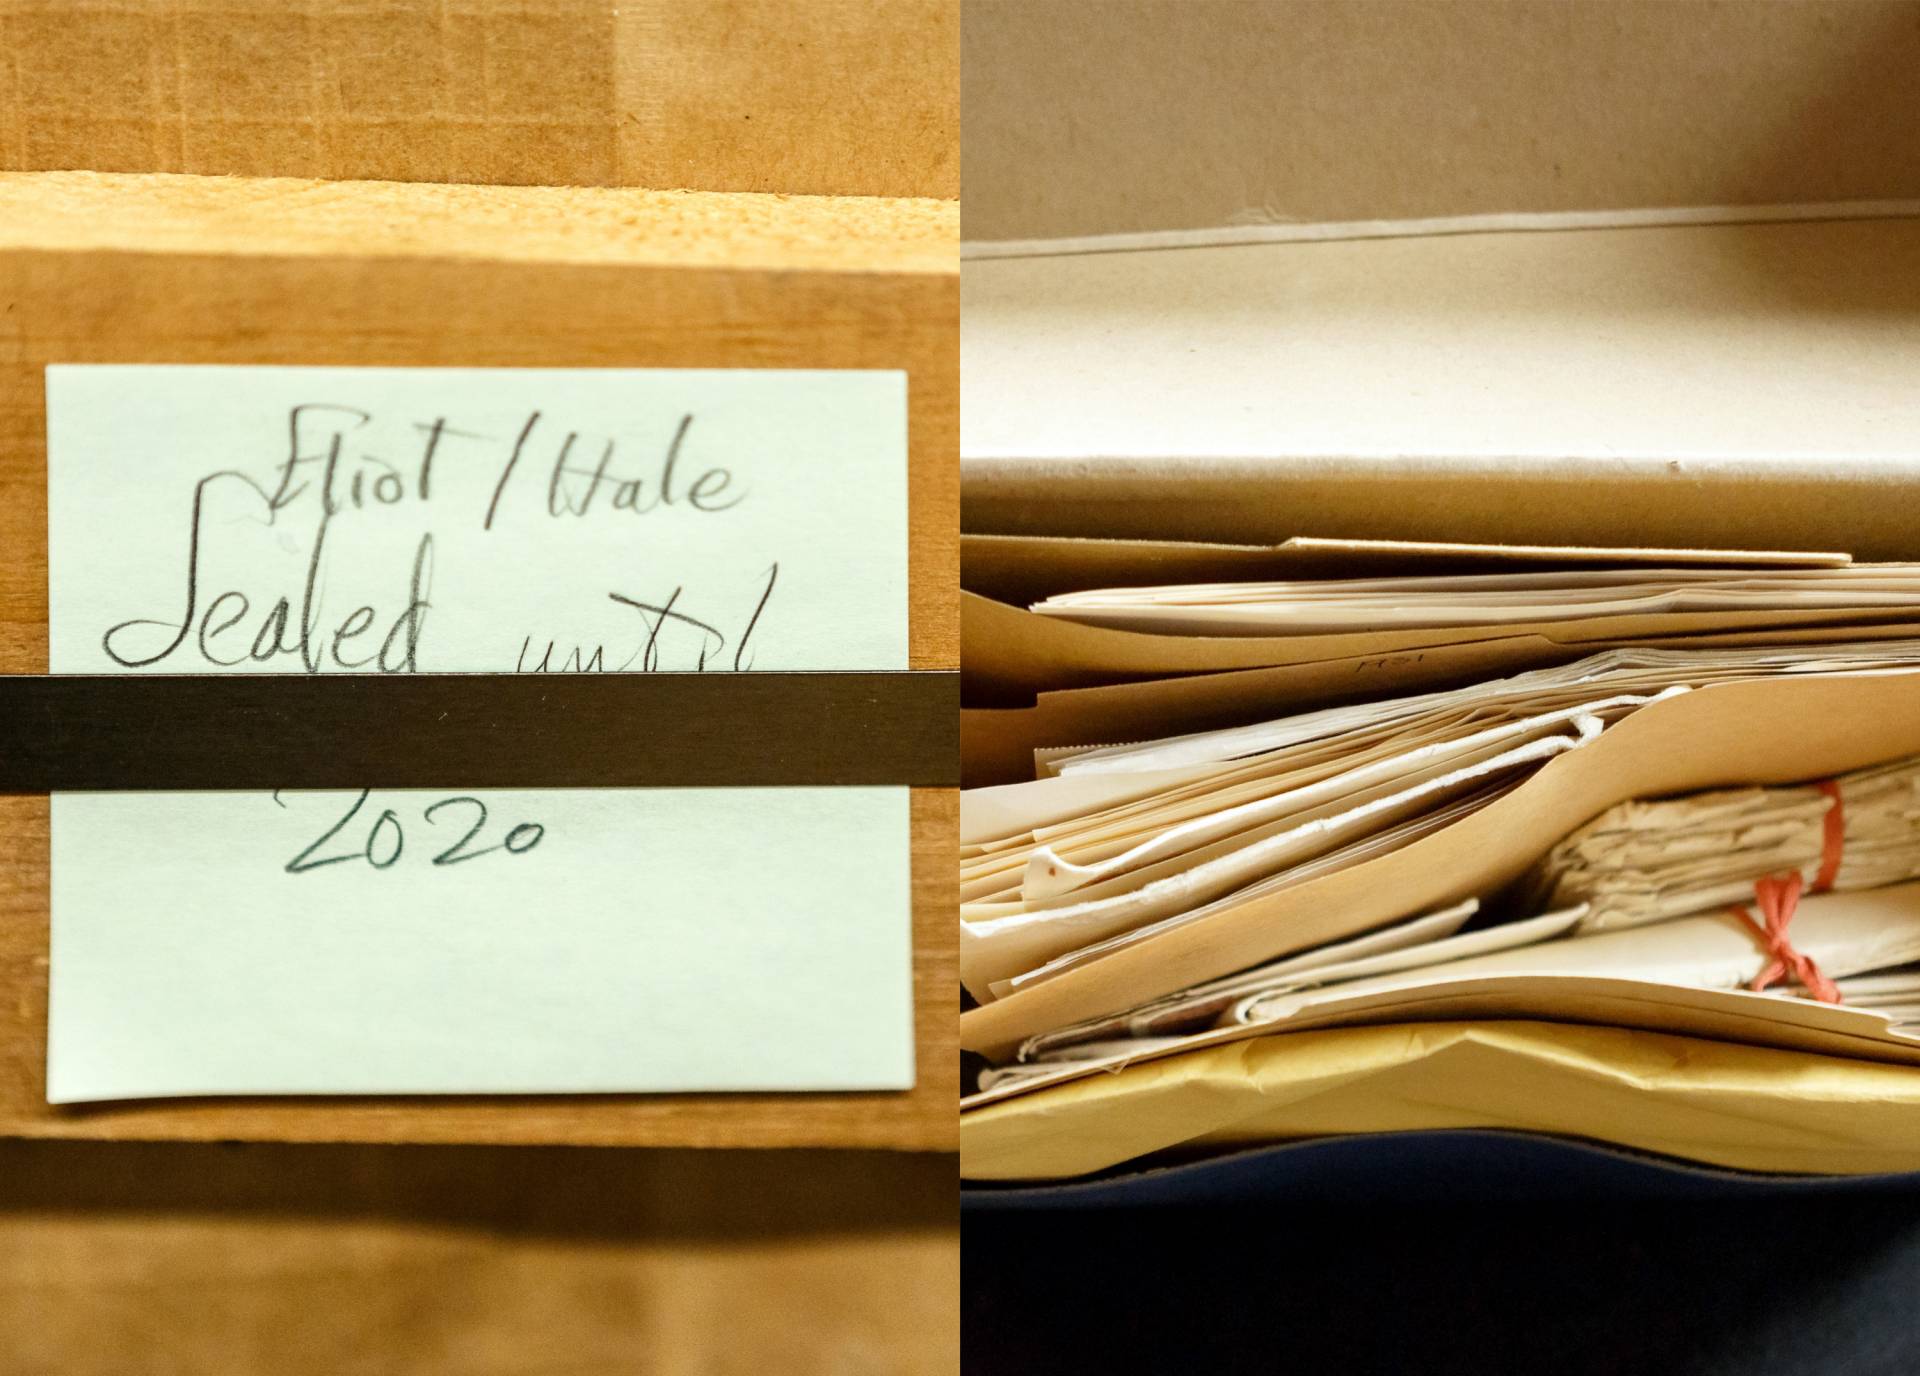 A post-it note on a box that reads, "Eliot/Hale, sealed until 2020" and a top view of a box full of papers